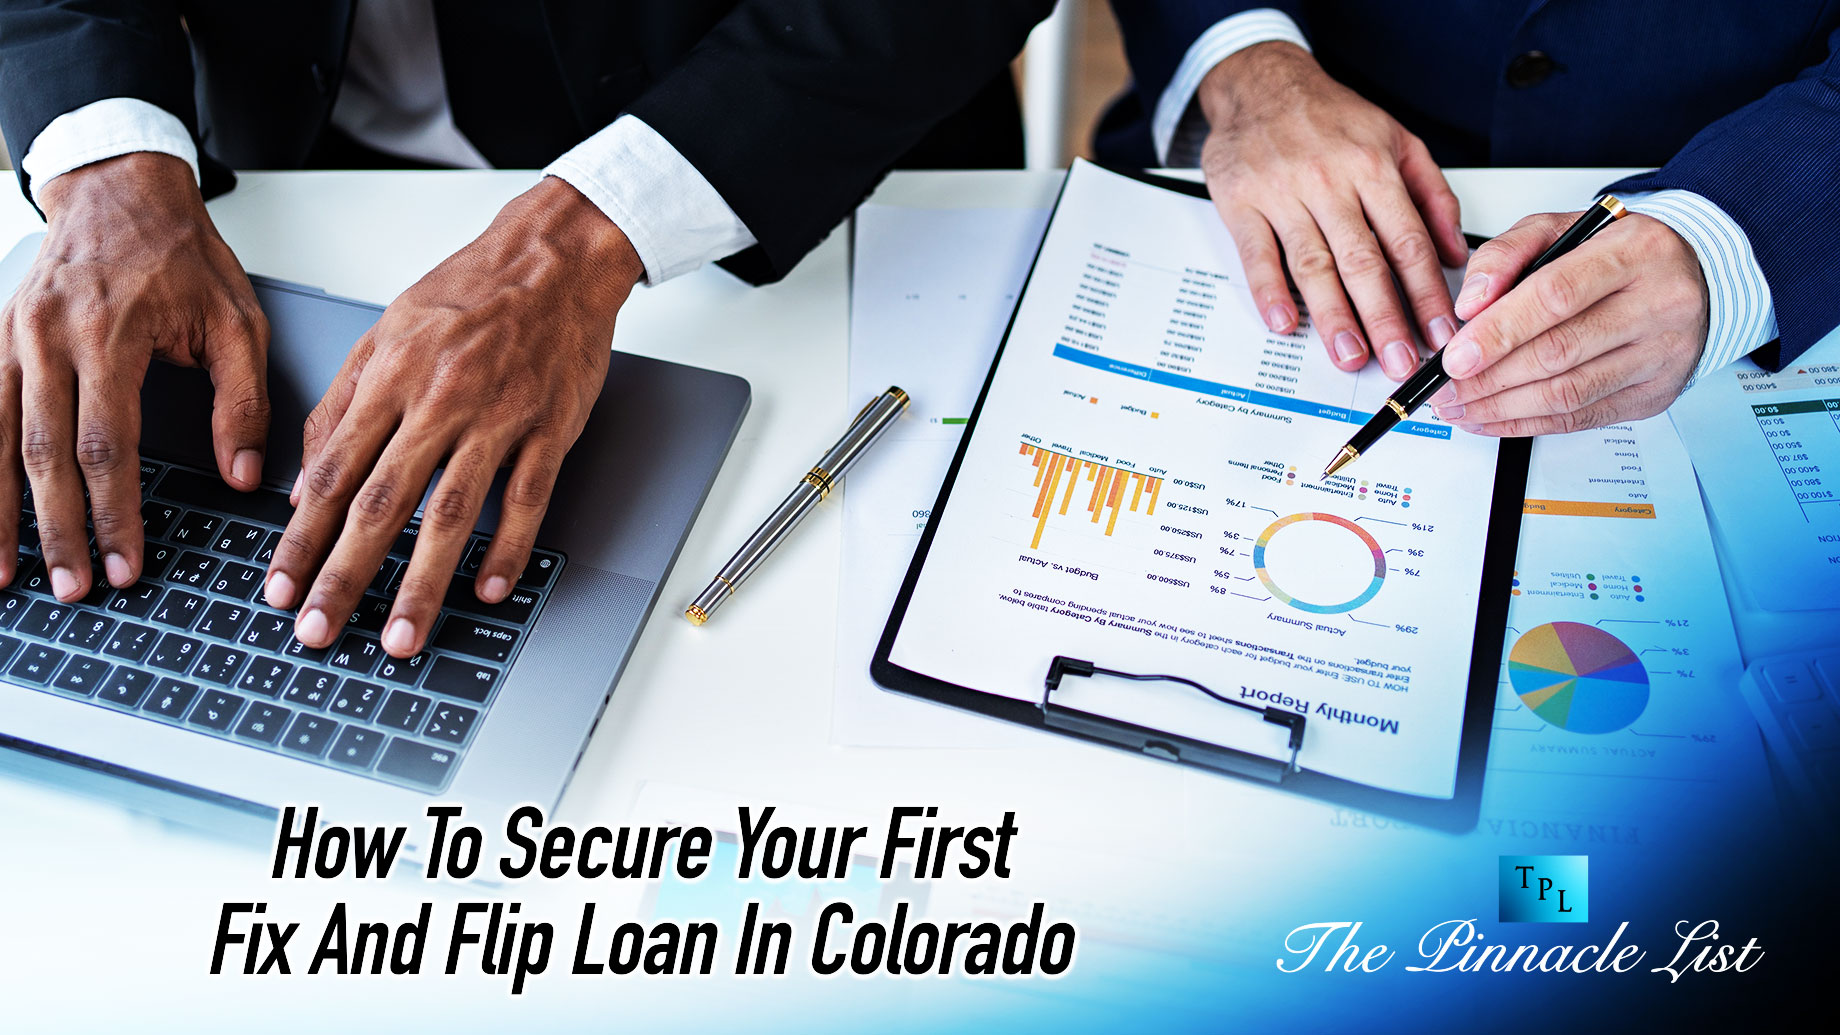 How To Secure Your First Fix And Flip Loan In Colorado